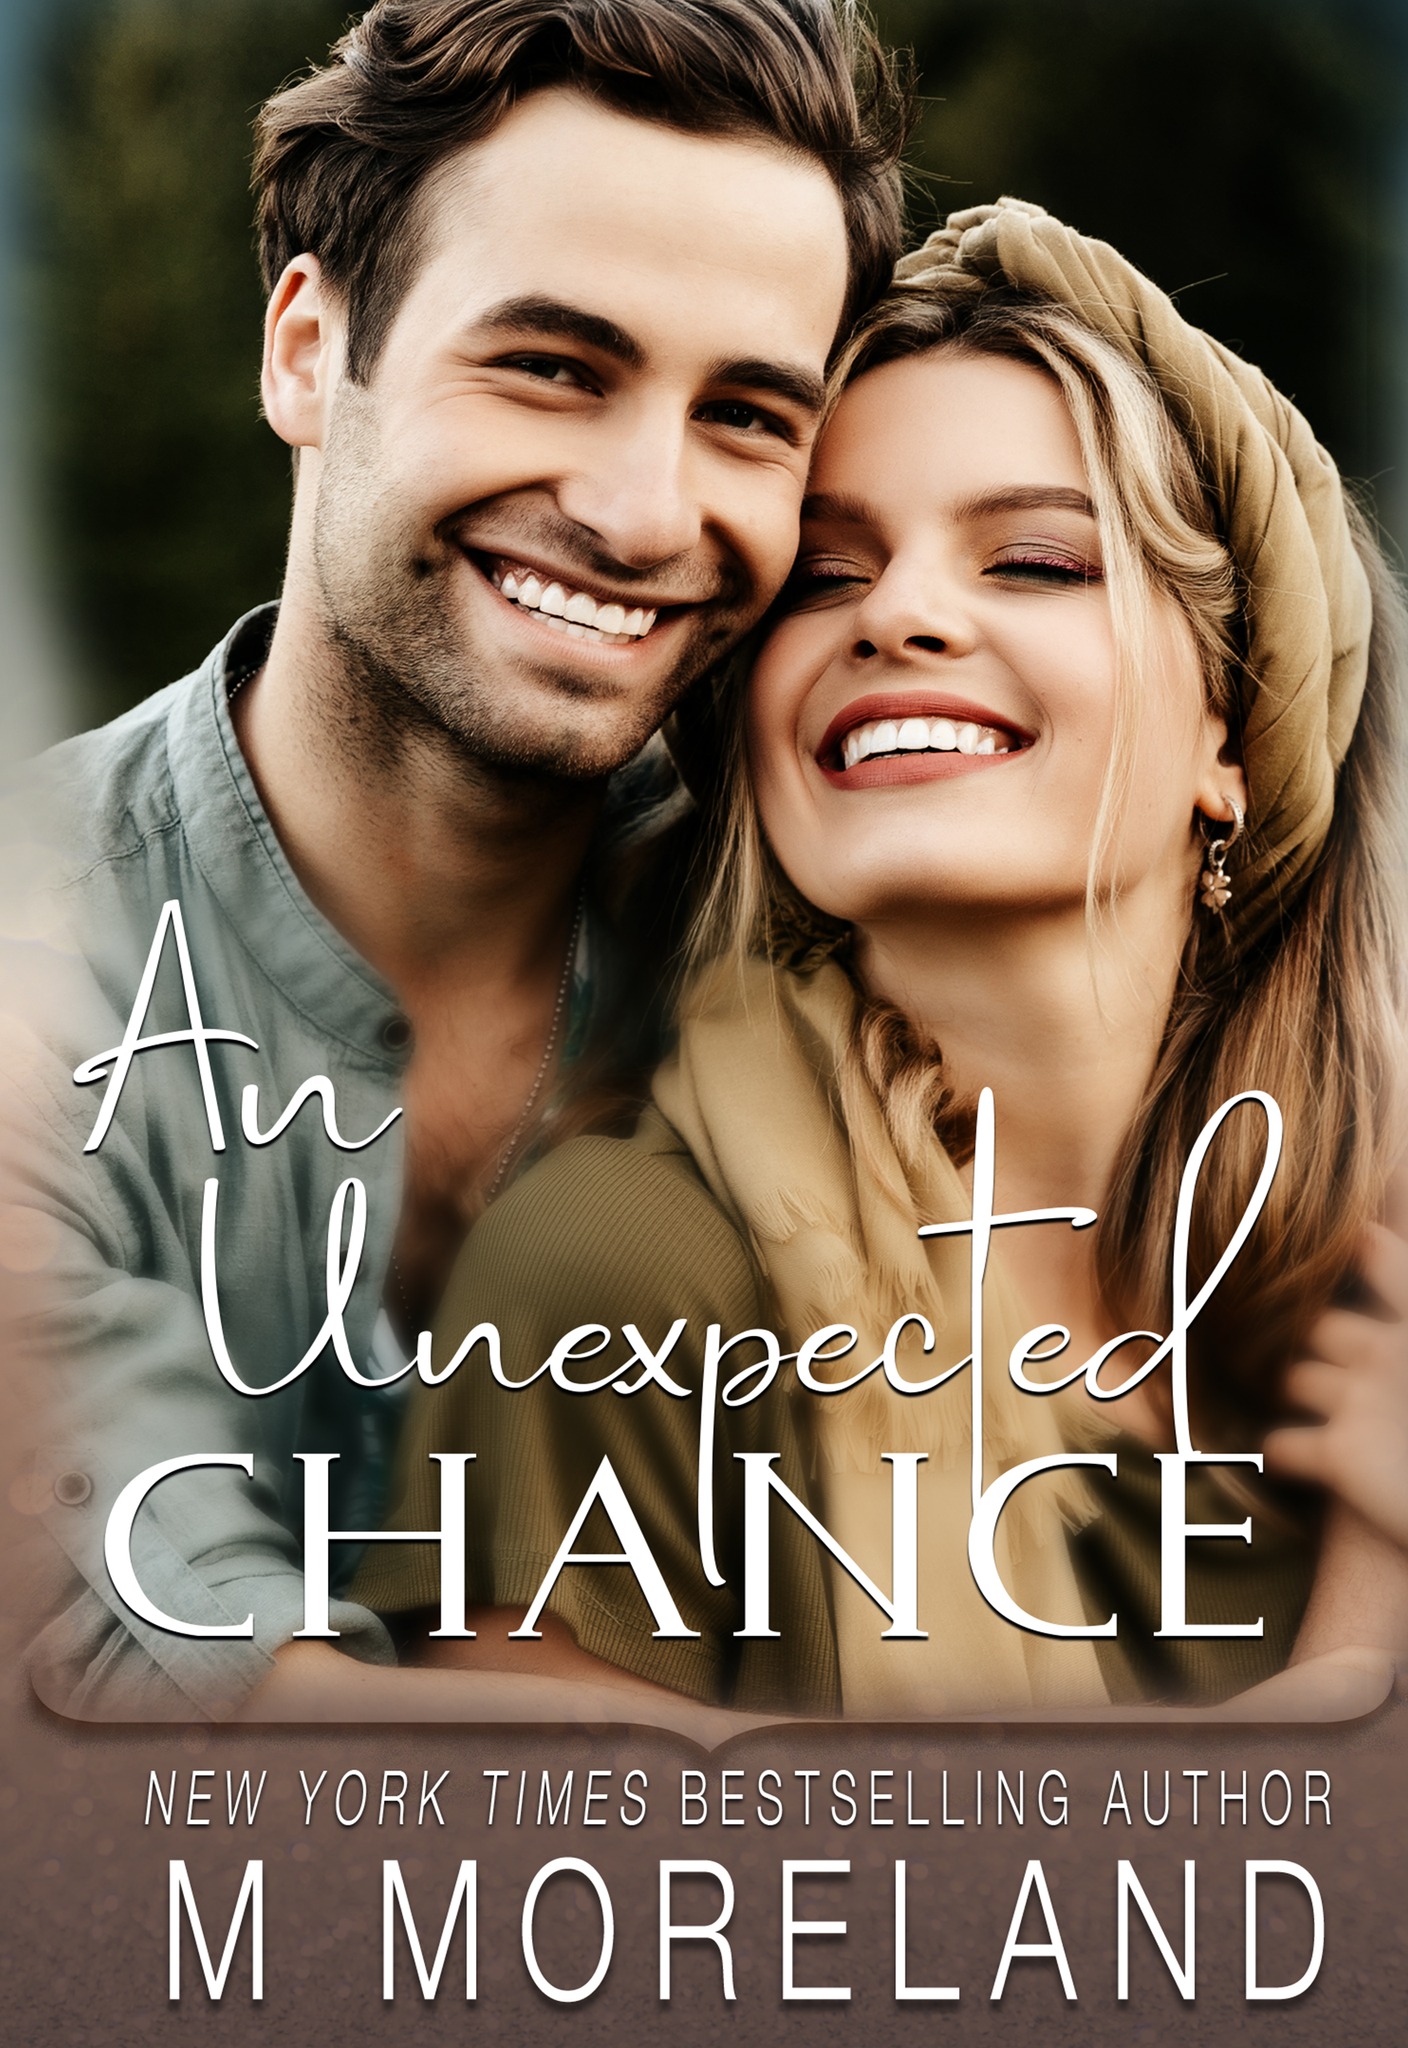 An Unexpected Chance by Melanie Moreland PDF Download